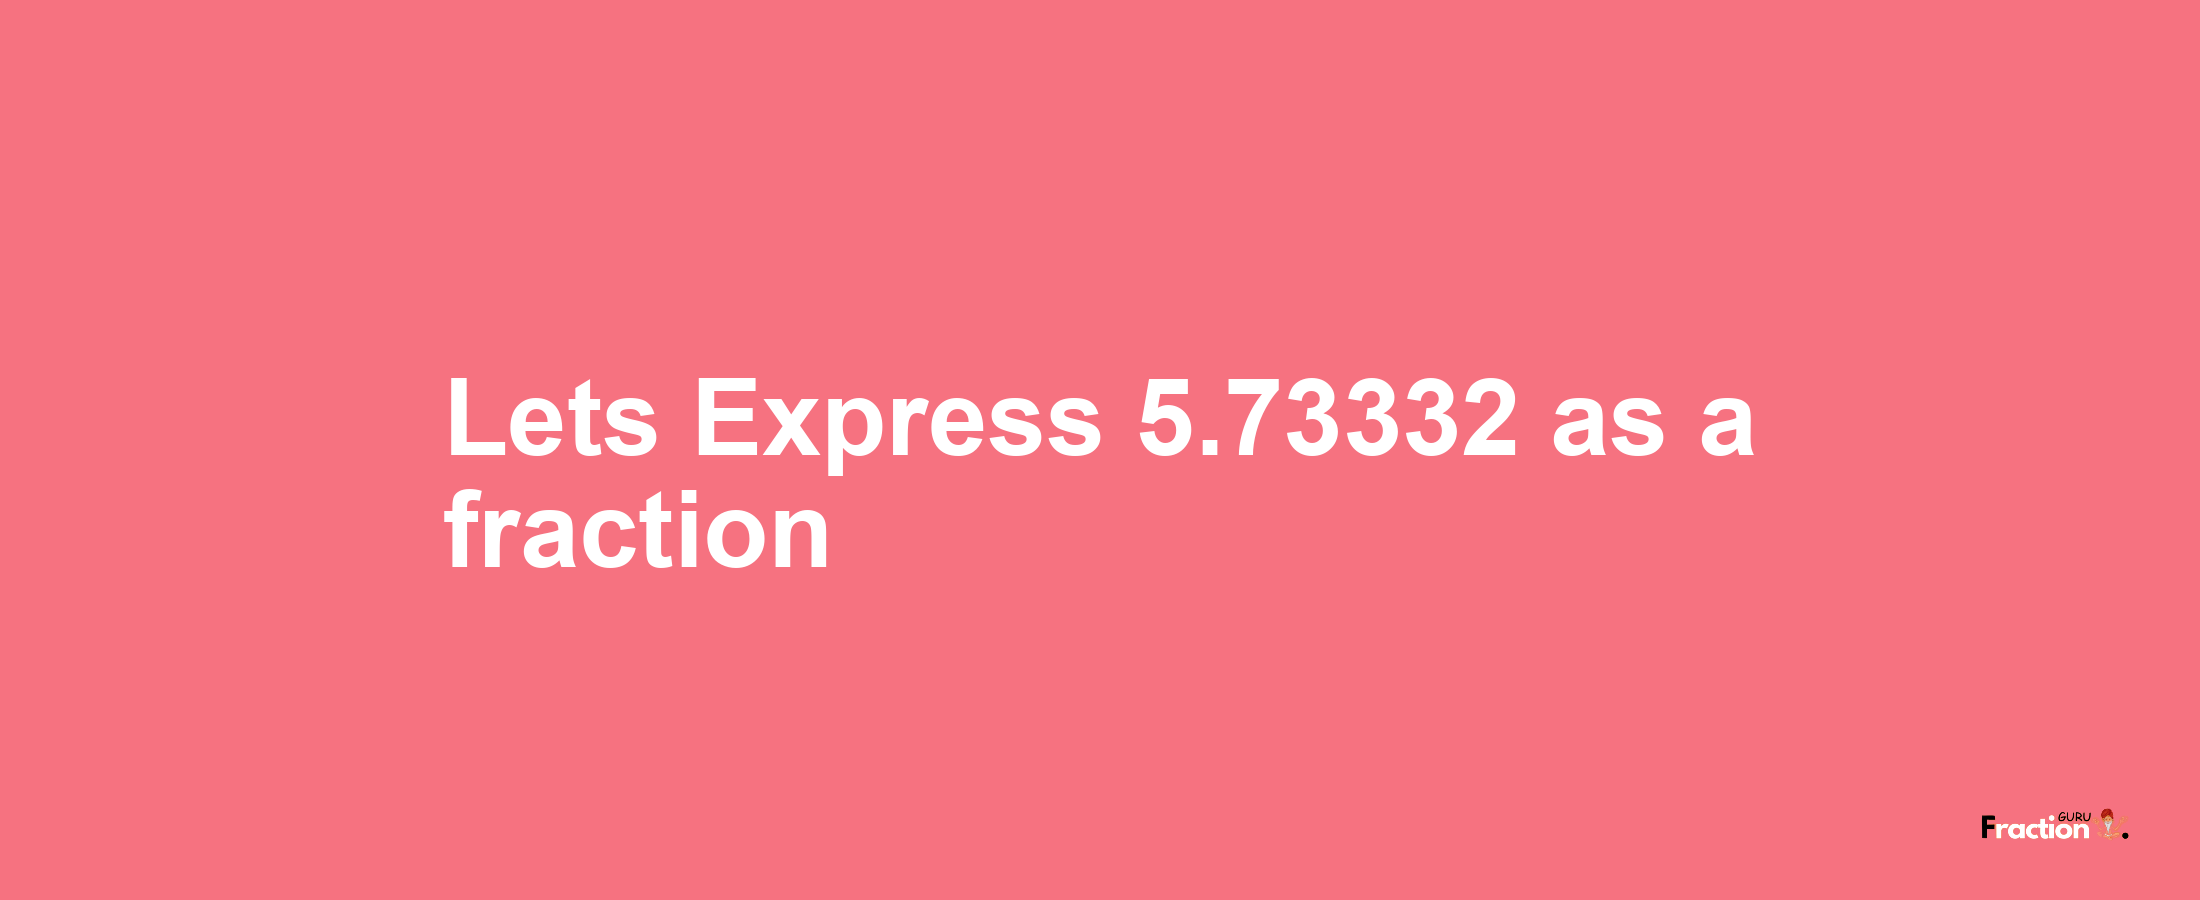 Lets Express 5.73332 as afraction